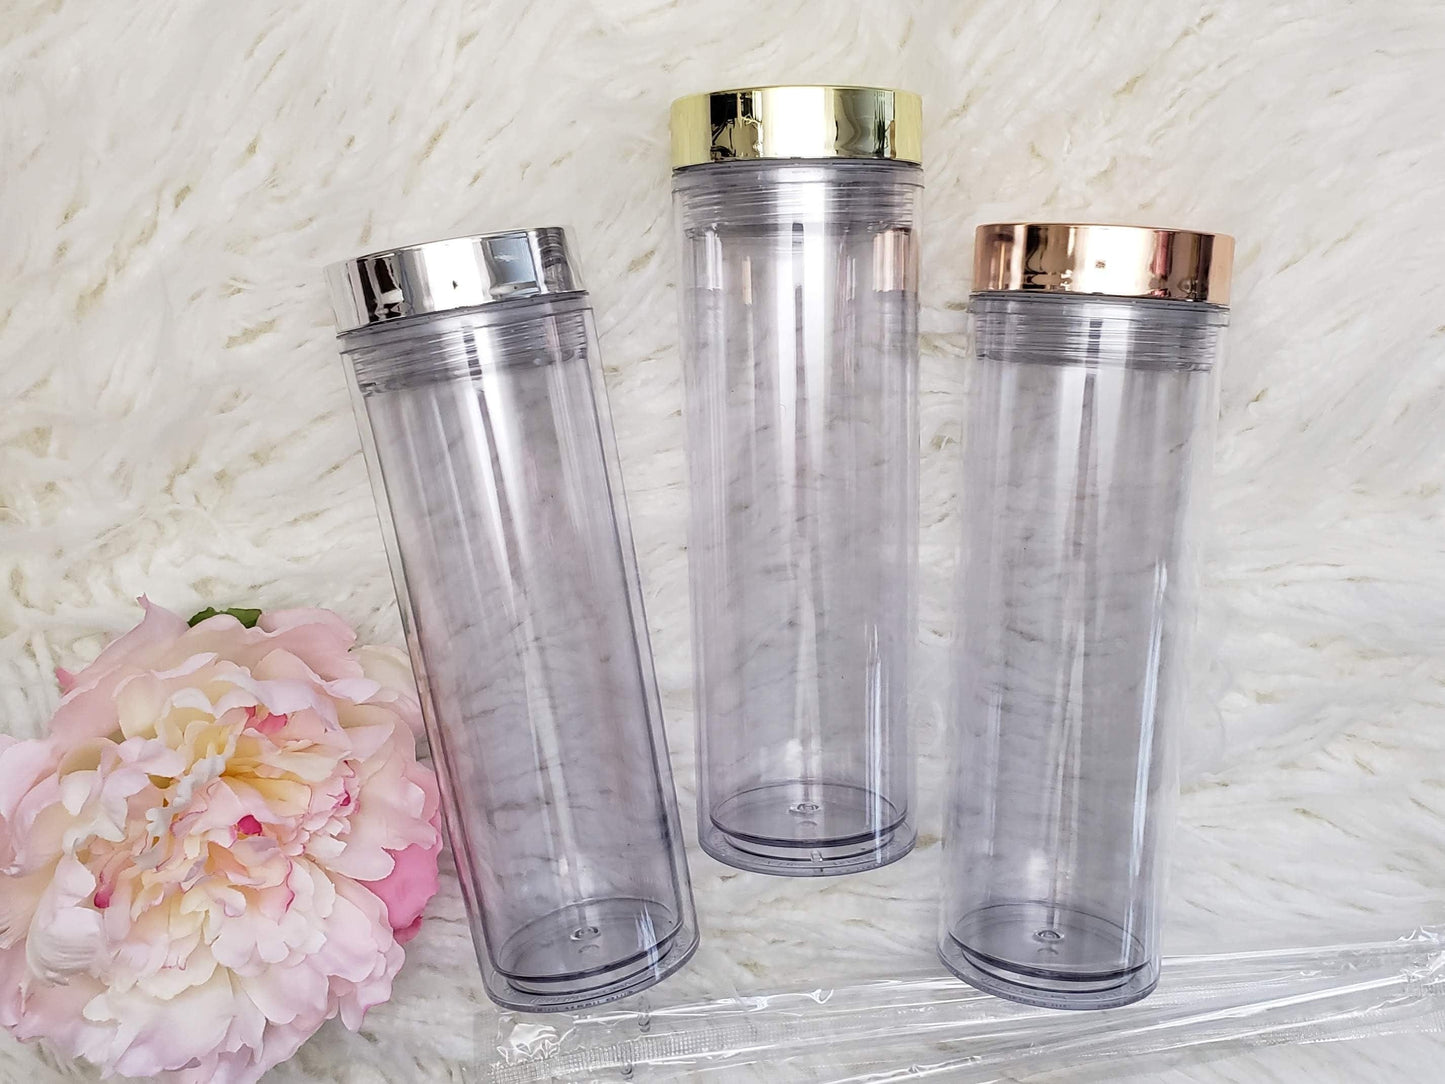 Bridal Party Personalized Handwritten Name Decal on Skinny Clear Acrylic Tumbler with Straw Bridal Party Personalized Handwritten Name Skinny Clear Acrylic Tumbler with Straw Candy Wrapper Store